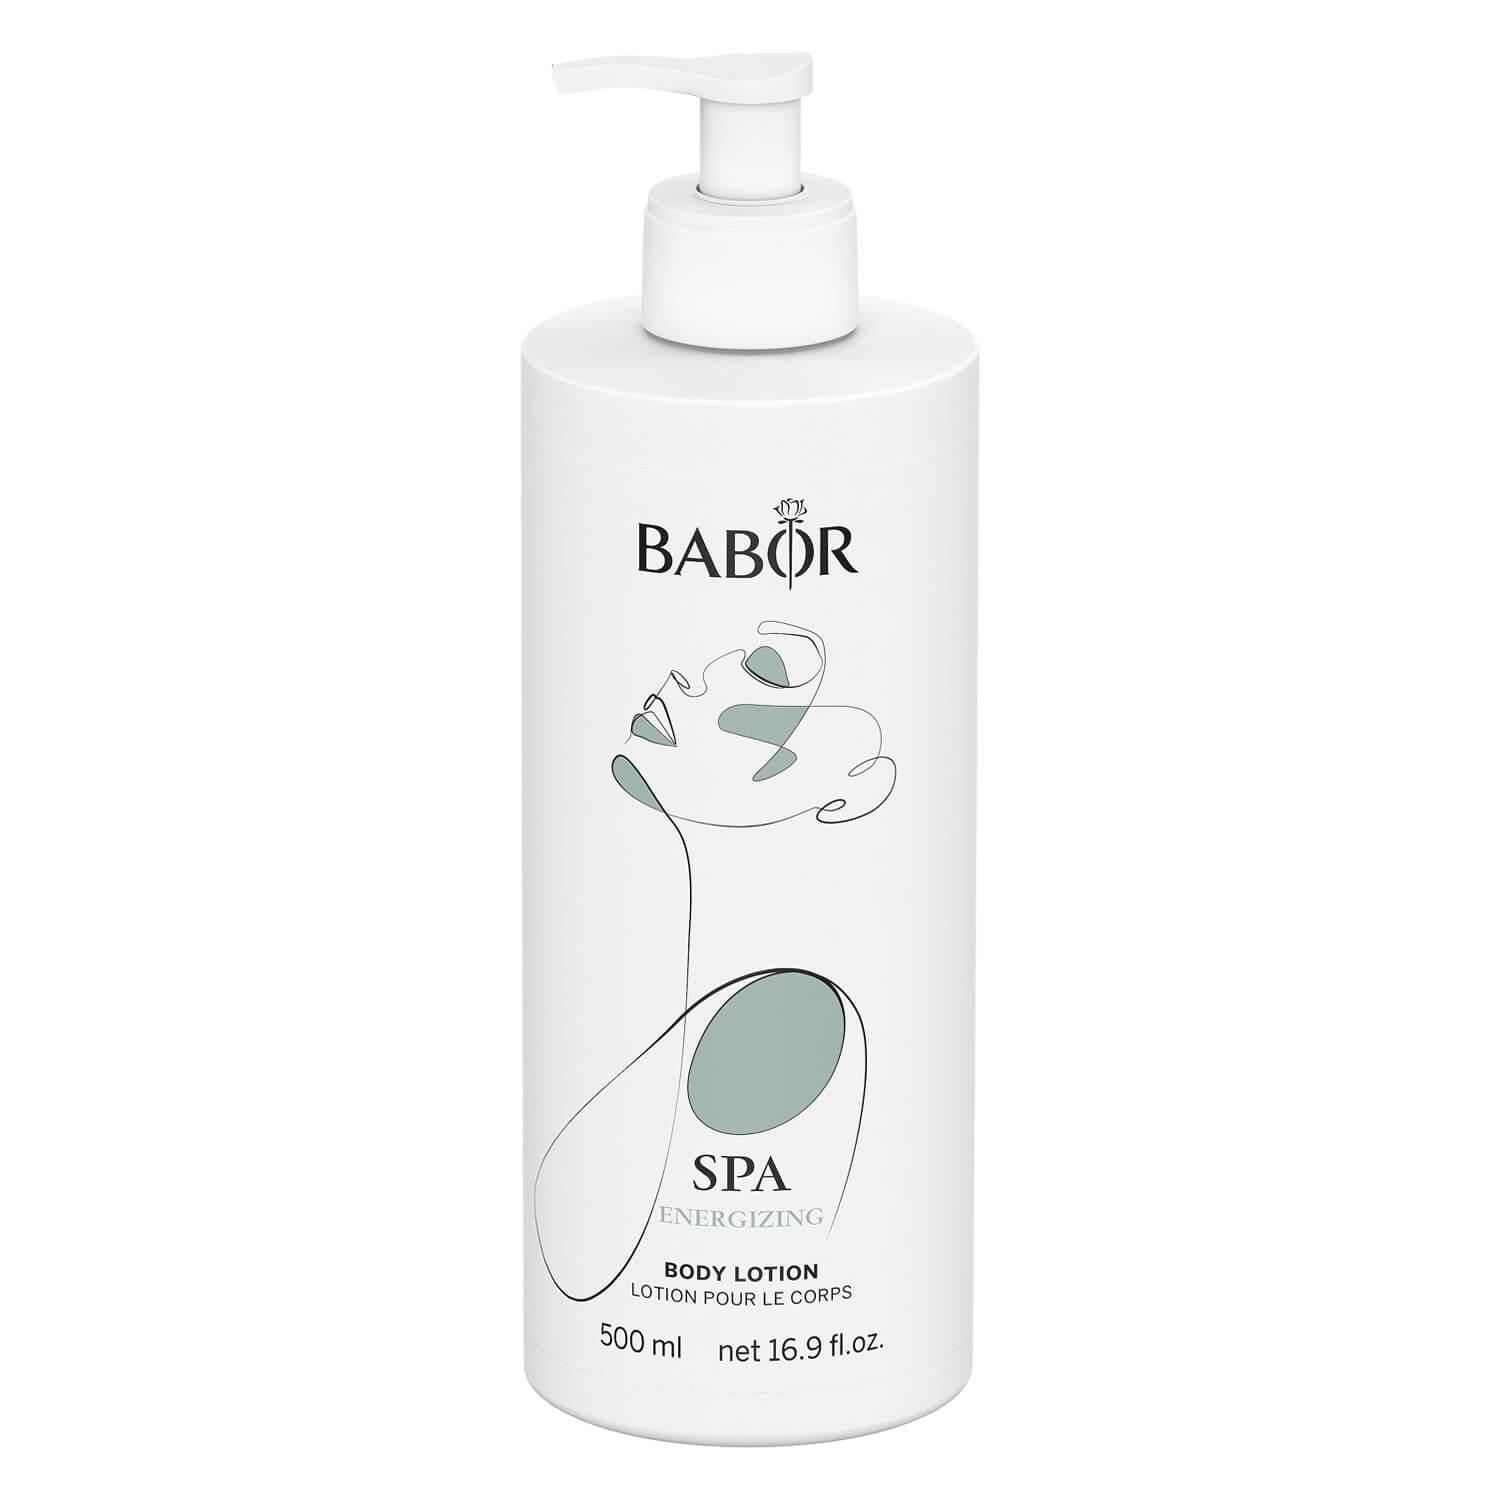 BABOR SPA - Energizing Body Lotion Limited Edition